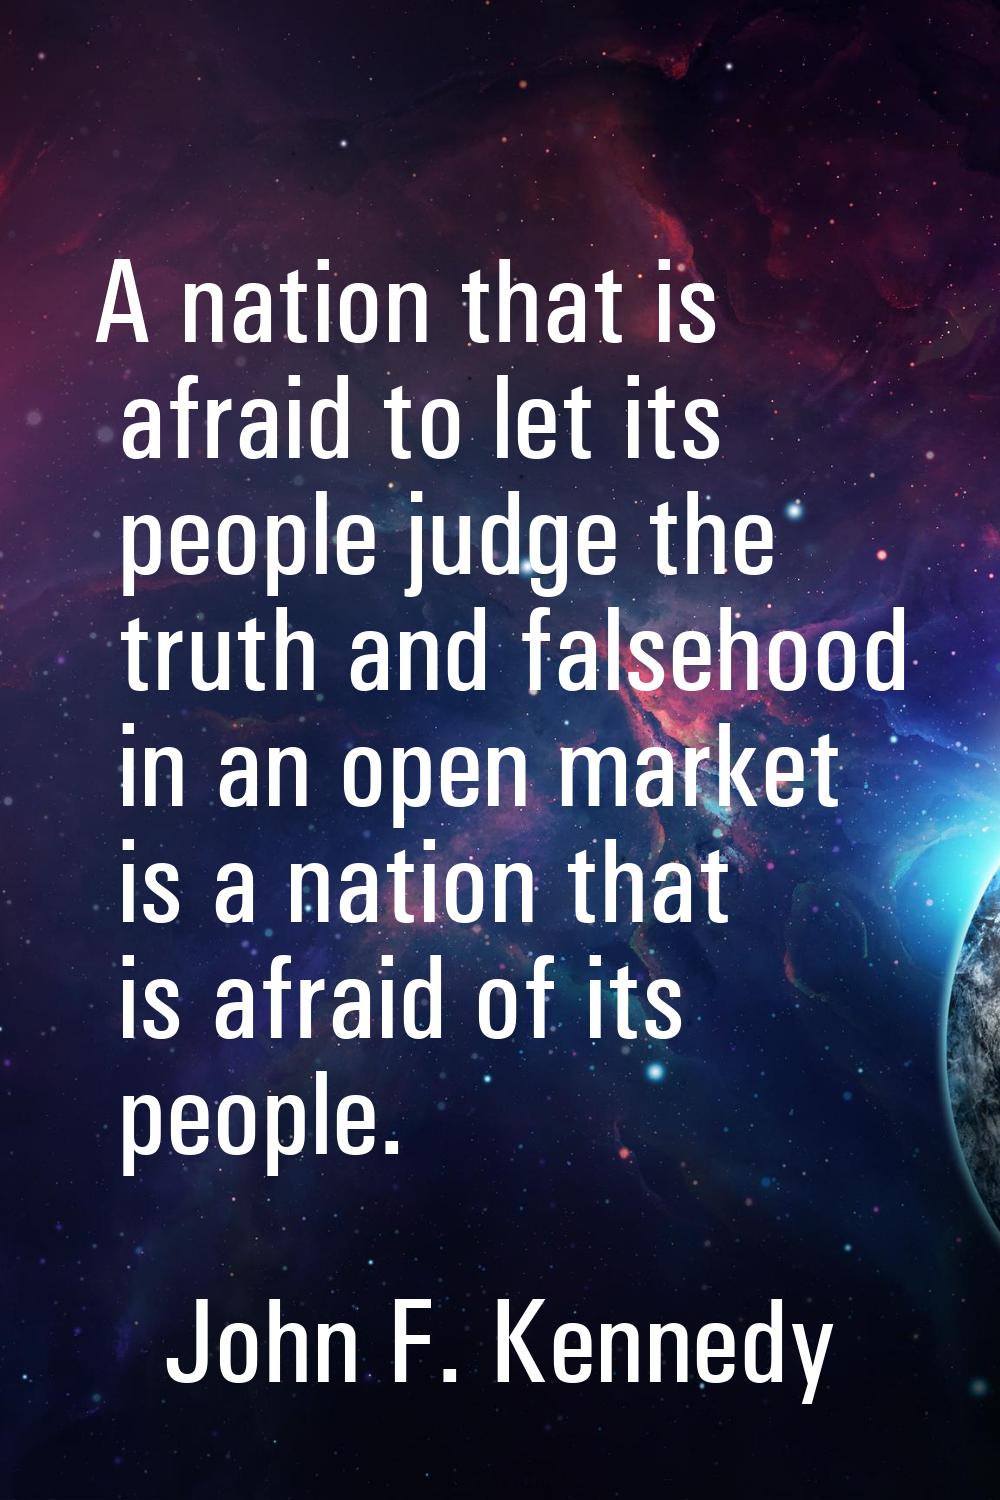 A nation that is afraid to let its people judge the truth and falsehood in an open market is a nati